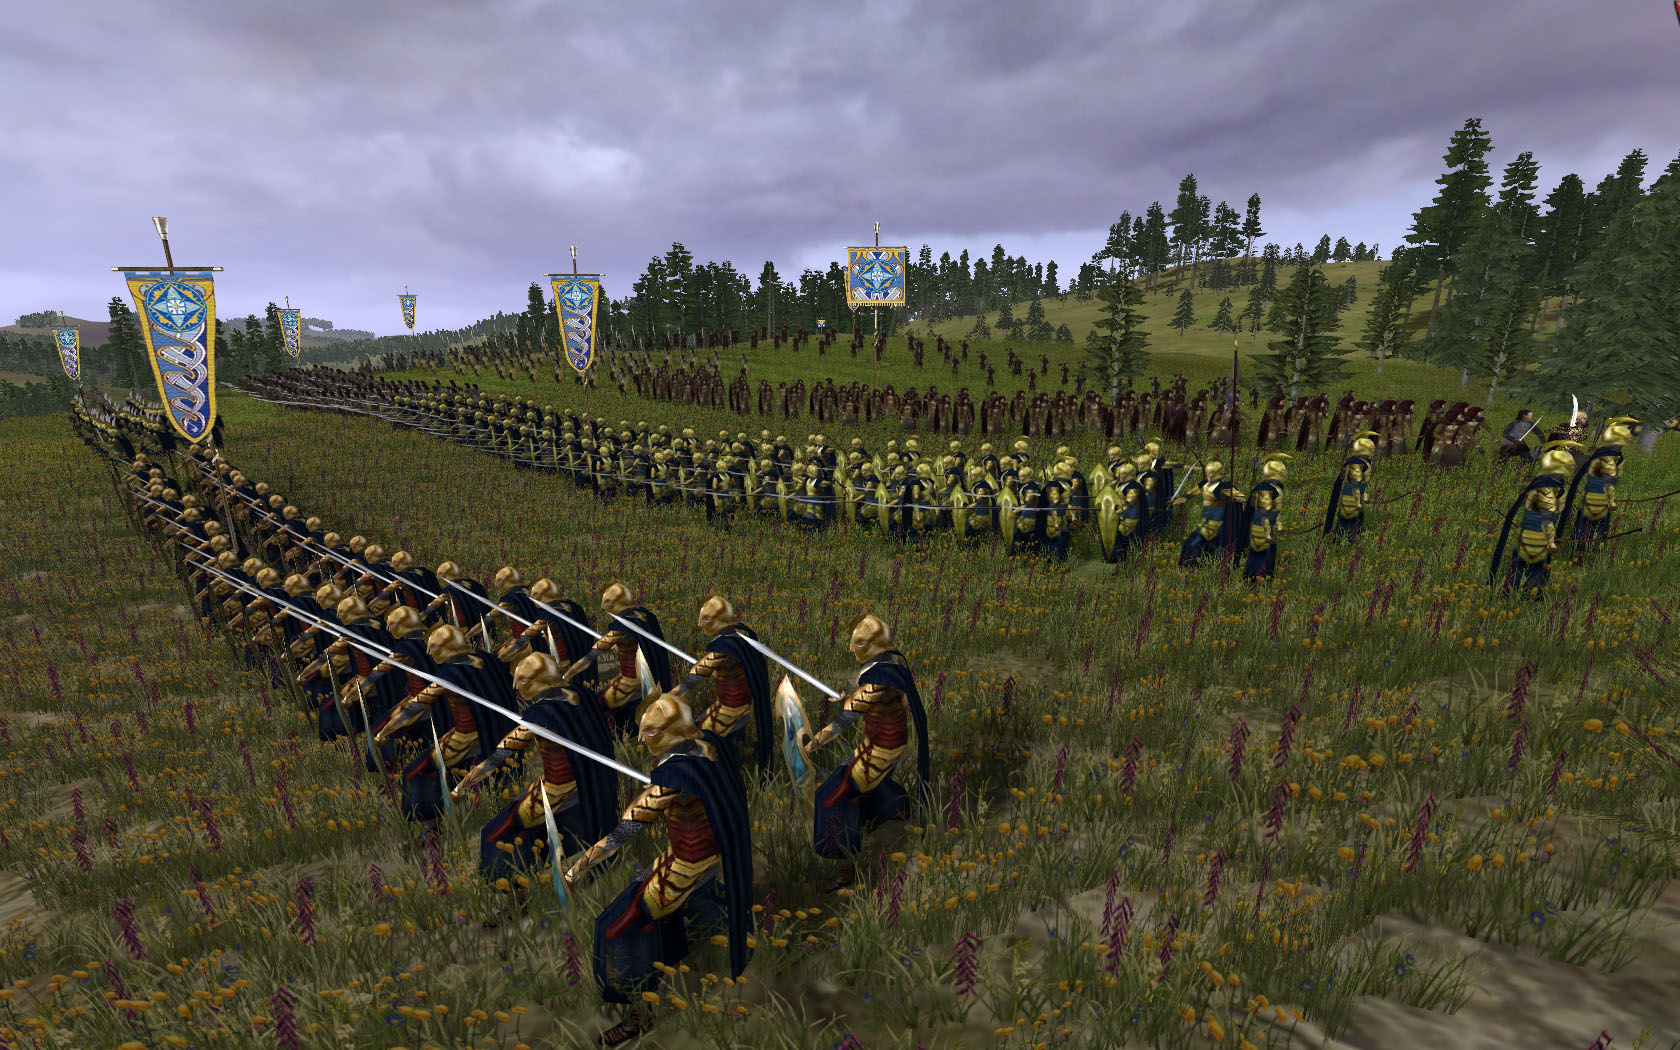 rome total war gold edition patch 1.6